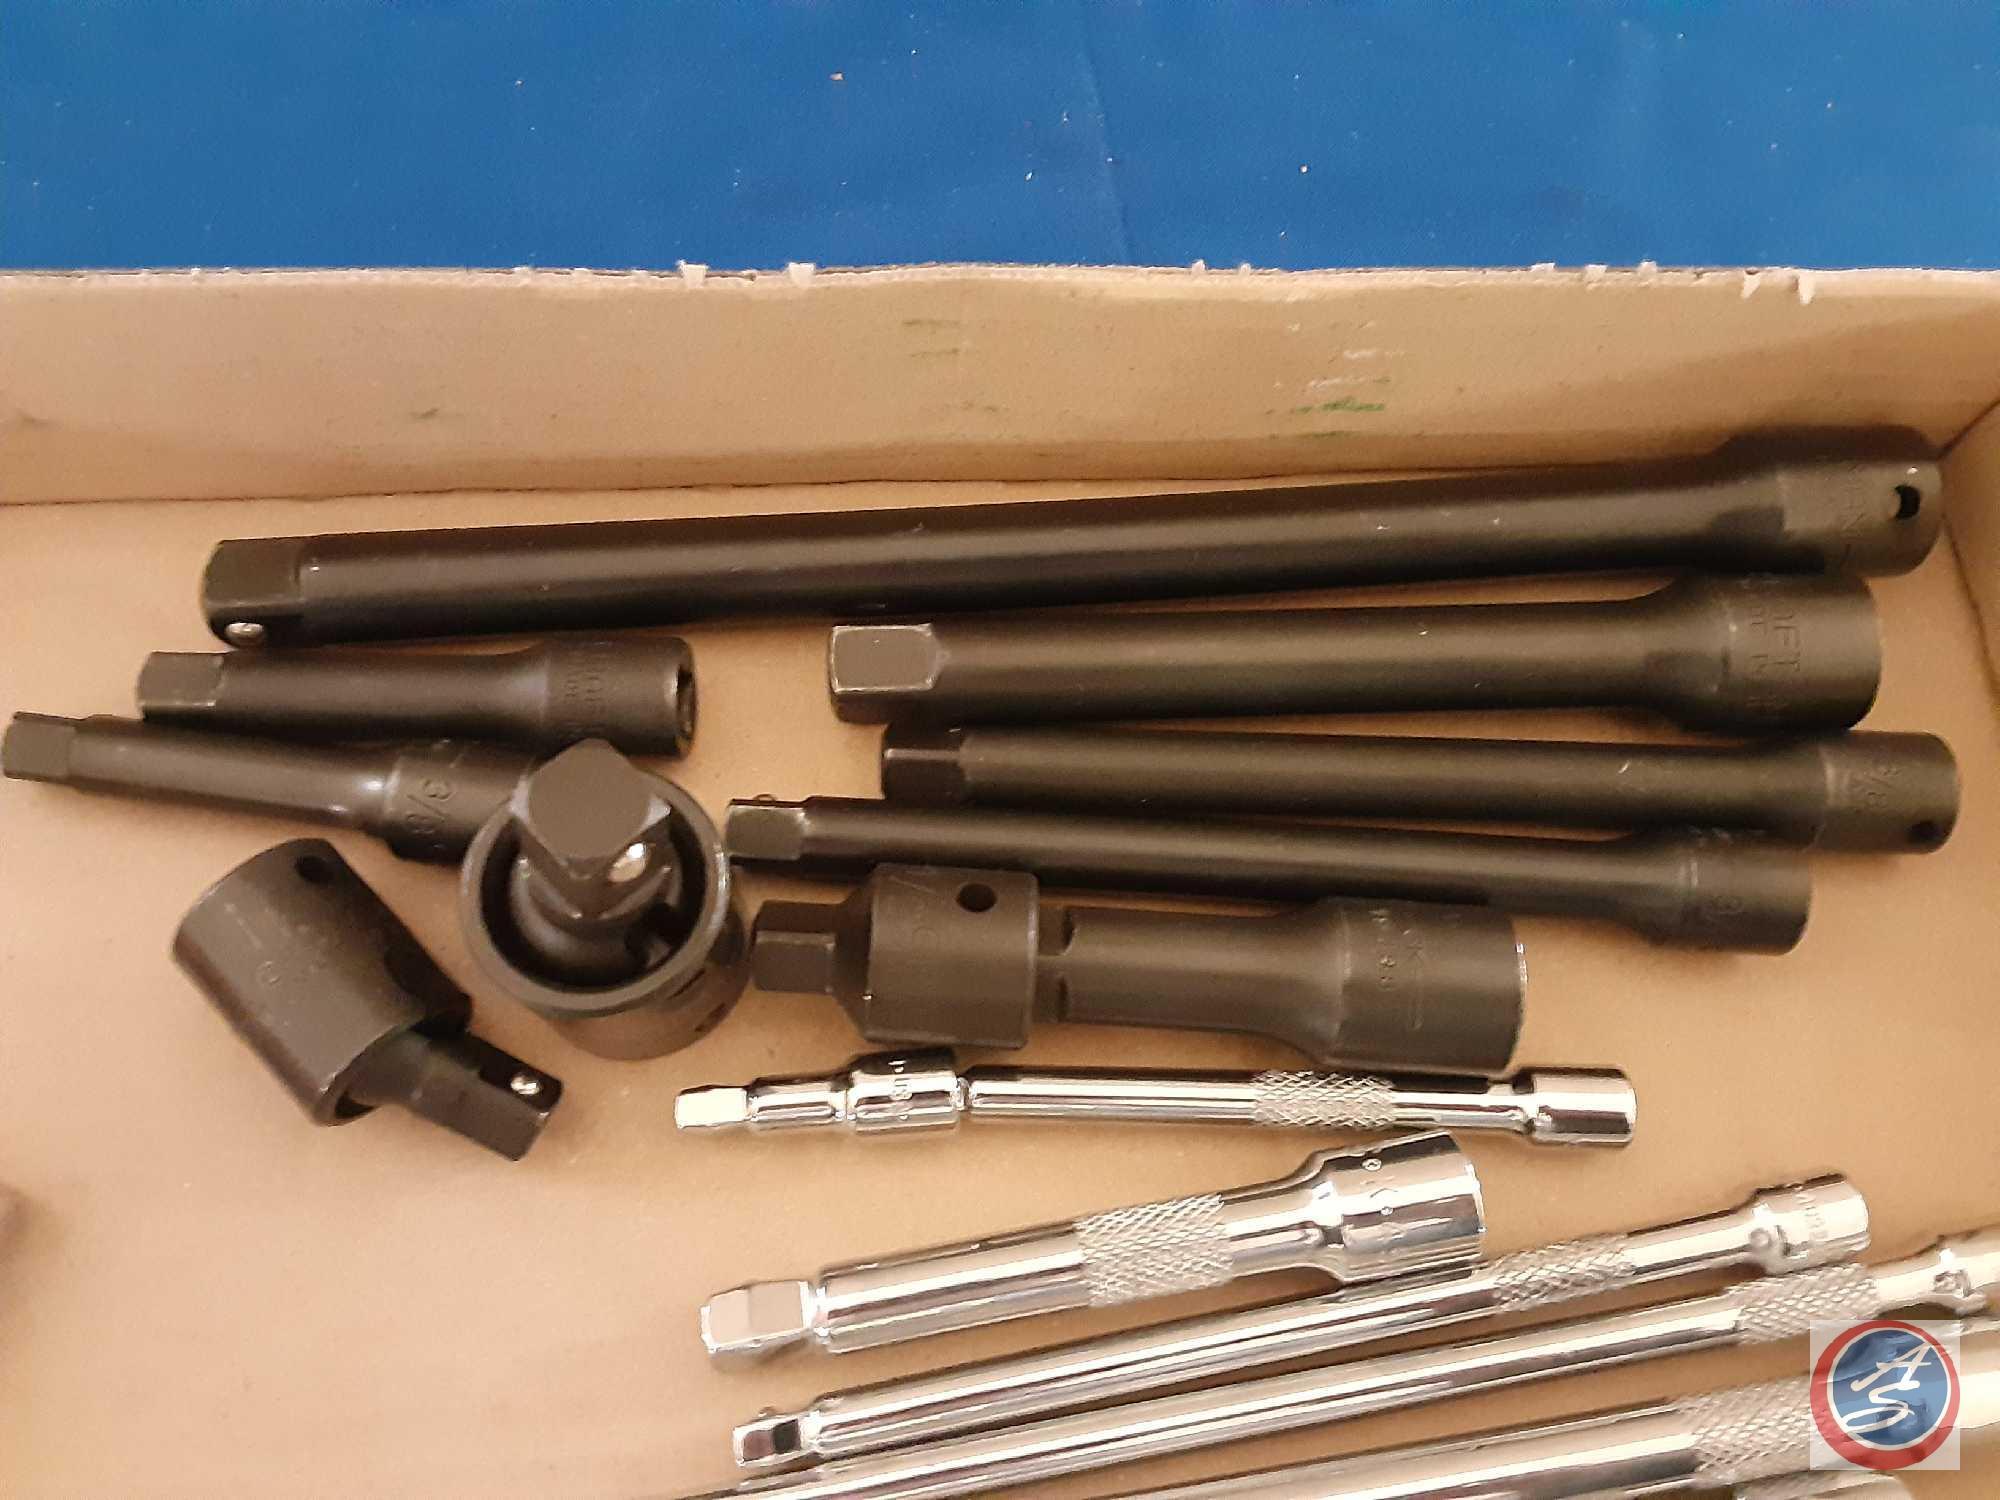 (1) Flat assorted socket extensions; Craftsman and others unkown.